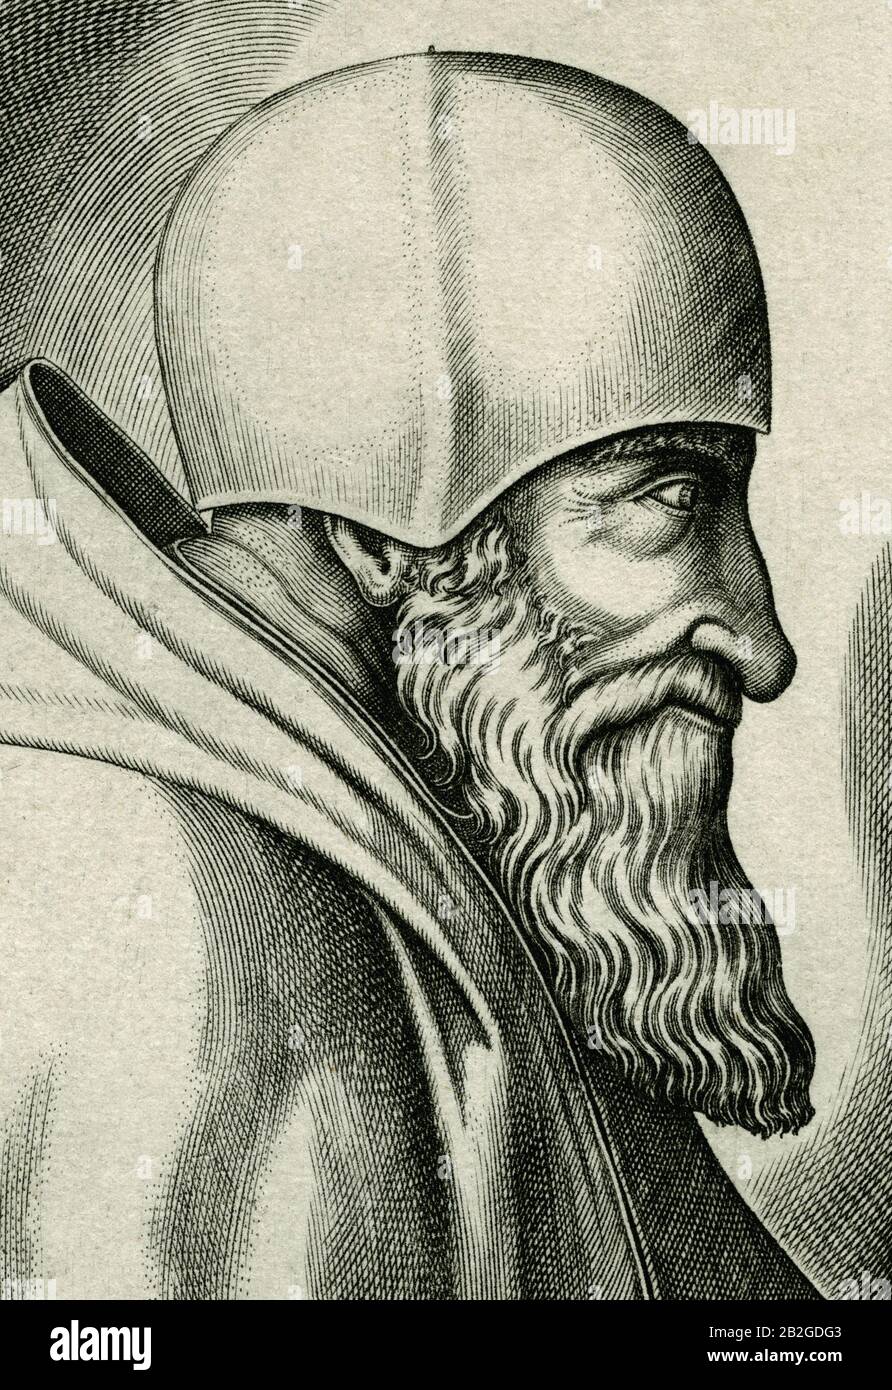 Paul III (1468-1549) who led the Counter-Reformation and was a significant patron of the arts. Detail of copperplate engraving created in 1600s engraver and printmaker Friedrich von (c.1580-1665).